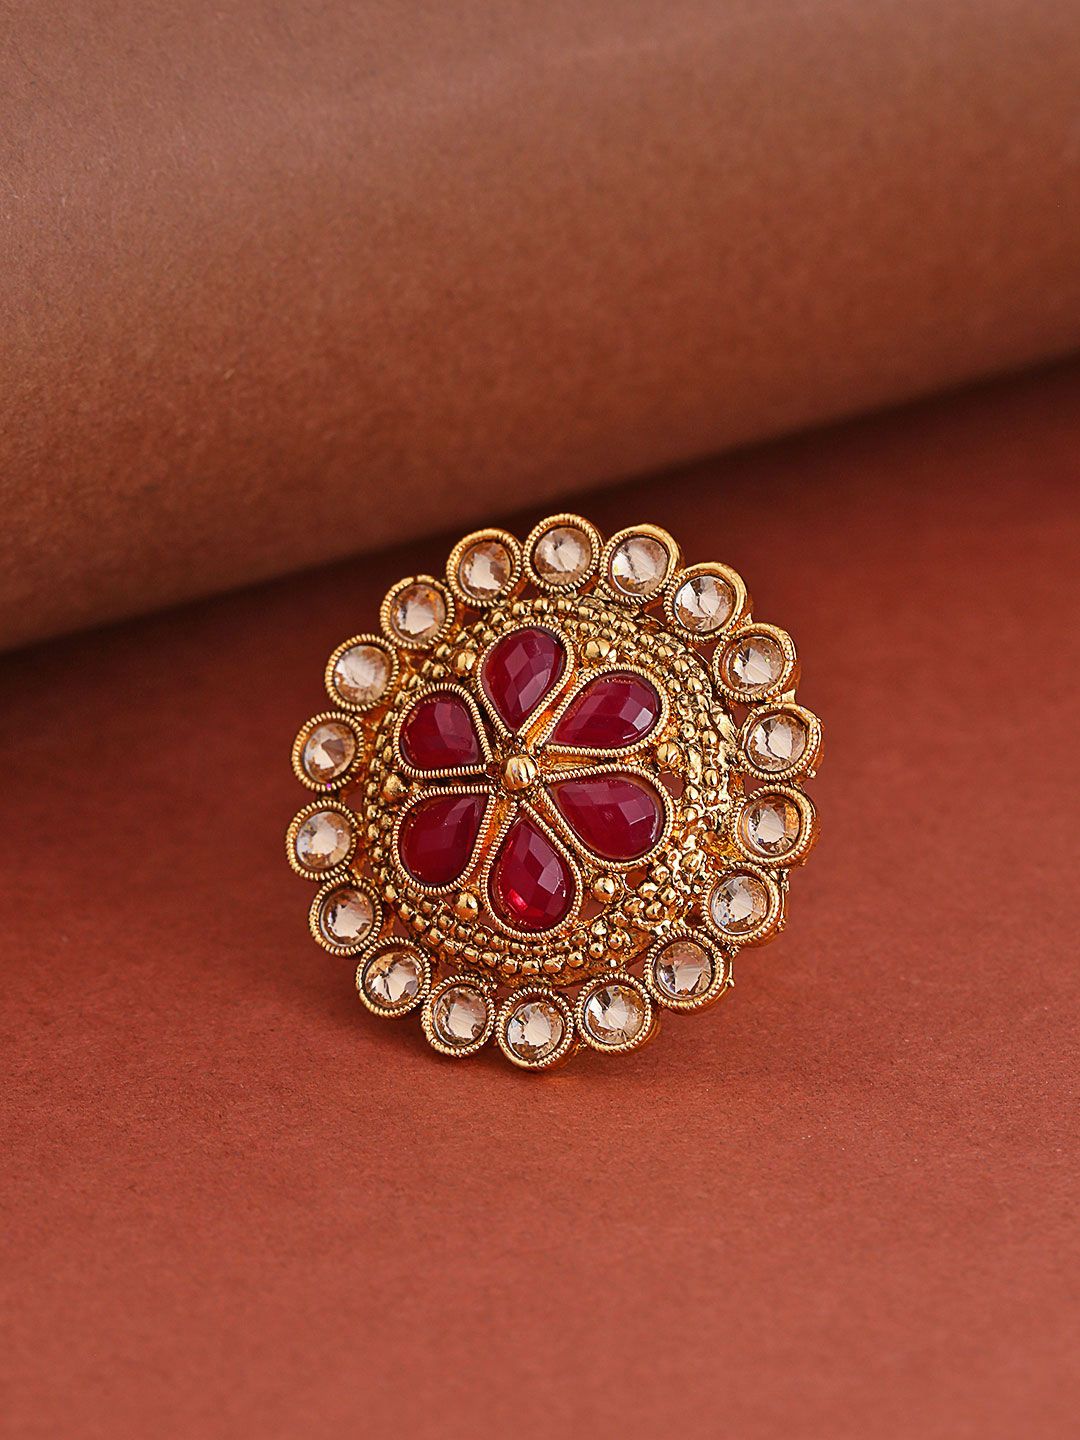 Priyaasi Pink Gold-Plated Kundan Studded Handcrafted Adjustable Finger Ring Price in India